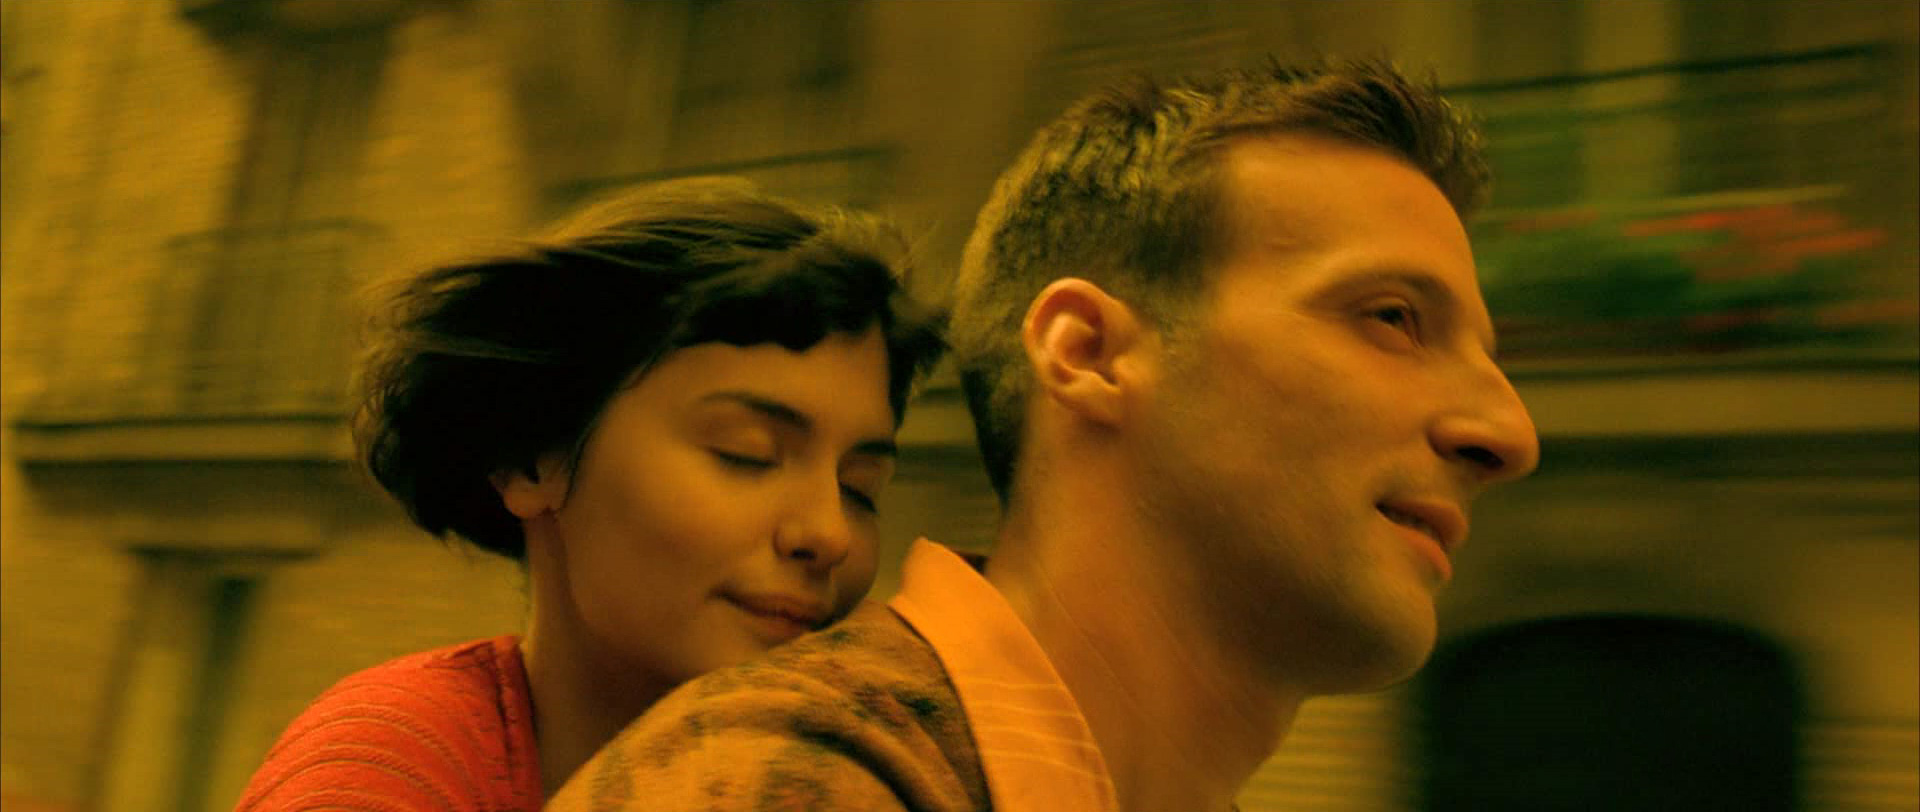 watch amelie with french subtitles